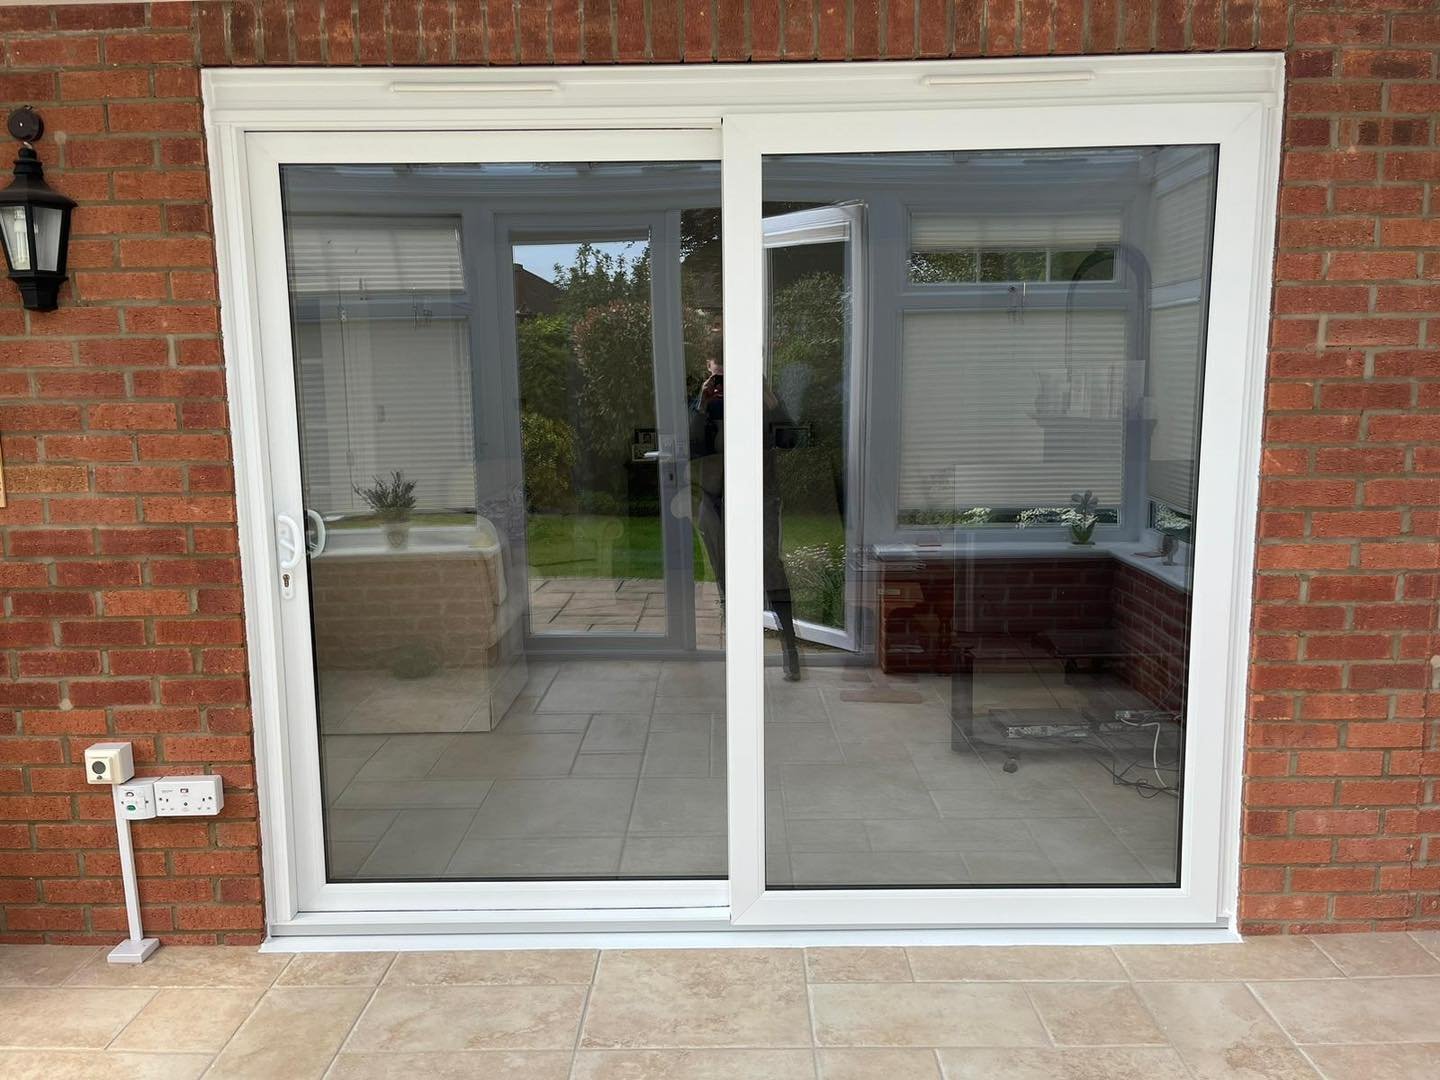 Lots of installations over the last week, a few images displaying a variety of installs from patio doors, Bifolding doors, a conservatory to a commercial library showcasing both our aluminium and Upvc products. Call us today for all of your home impr